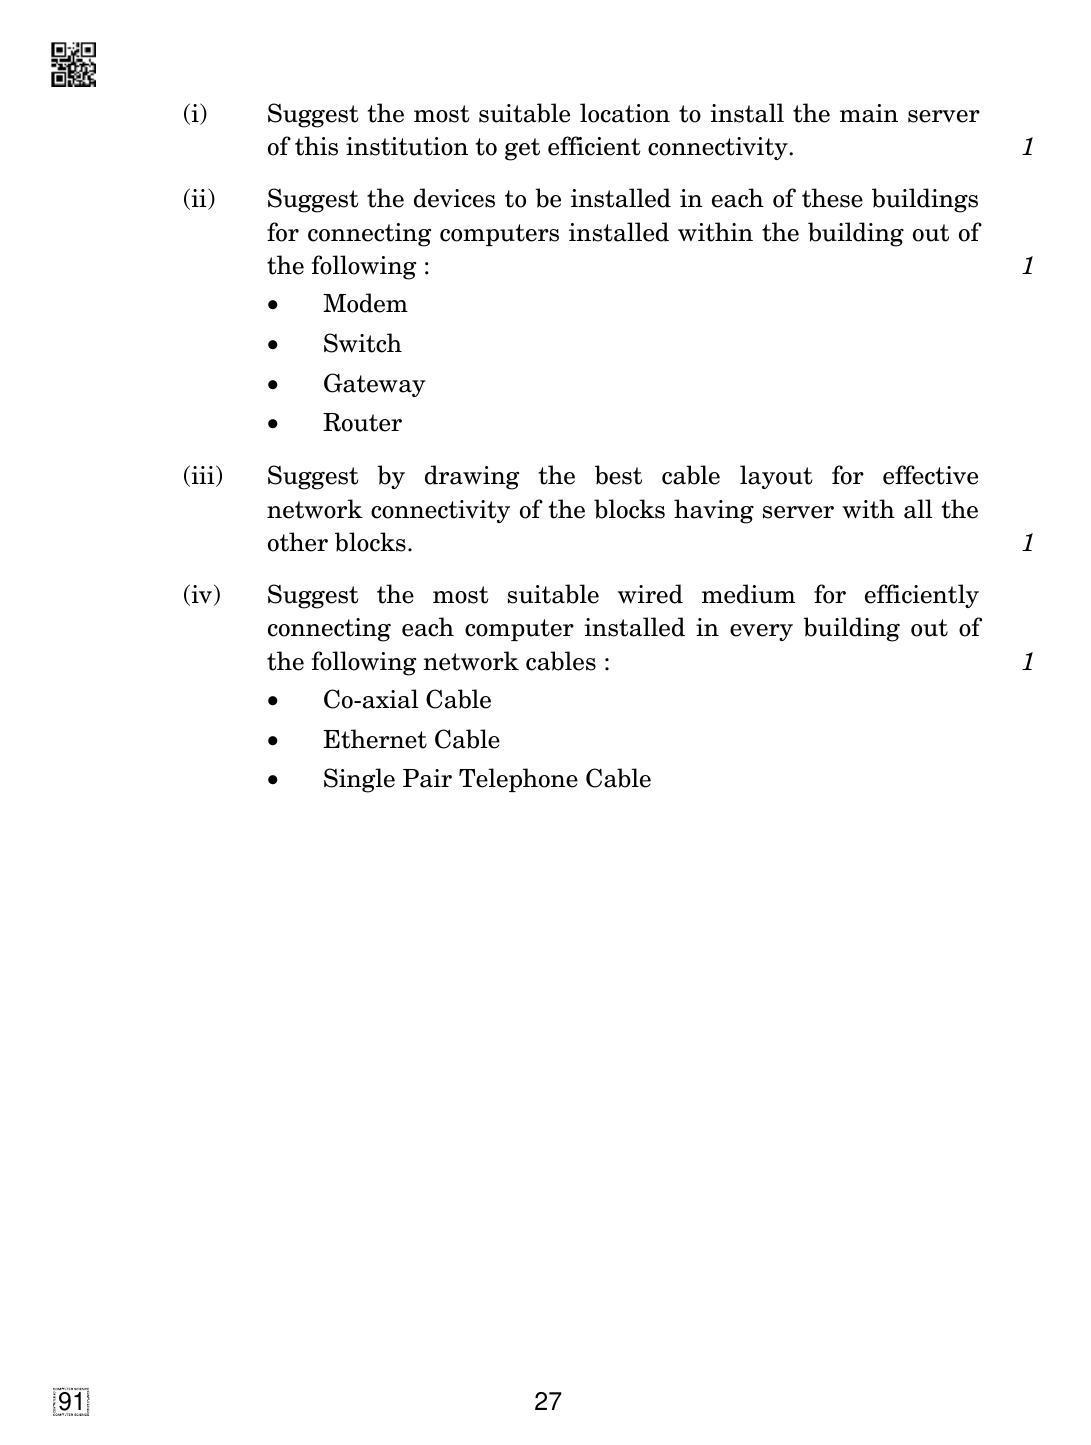 CBSE Class 12 91 Computer Science 2019 Question Paper - Page 27